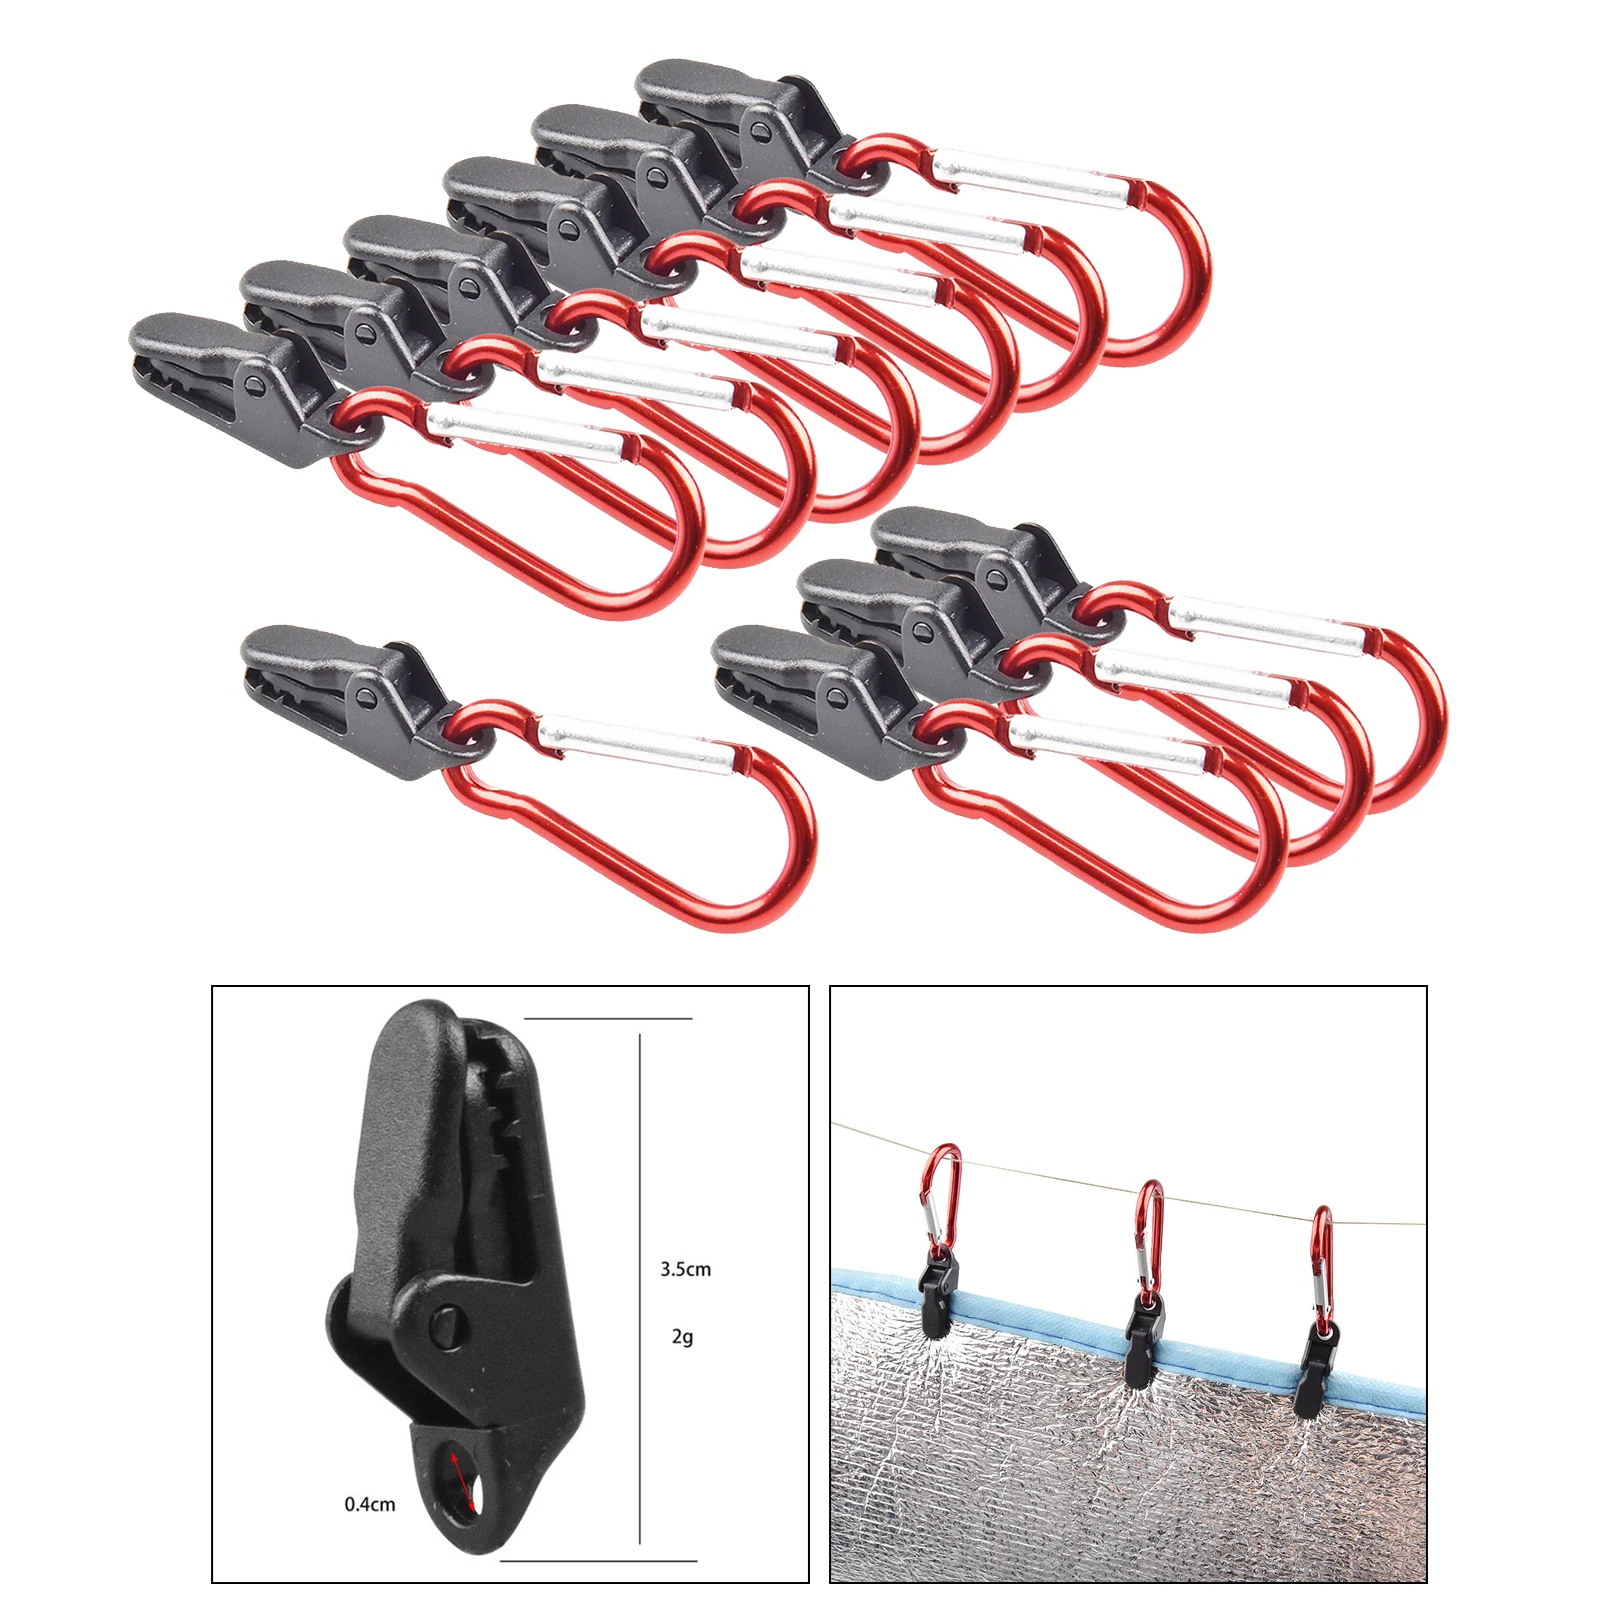 10pcs Heavy Duty Tarp Clips Tent Clamps Holding Up Alligator Mouth Buckle